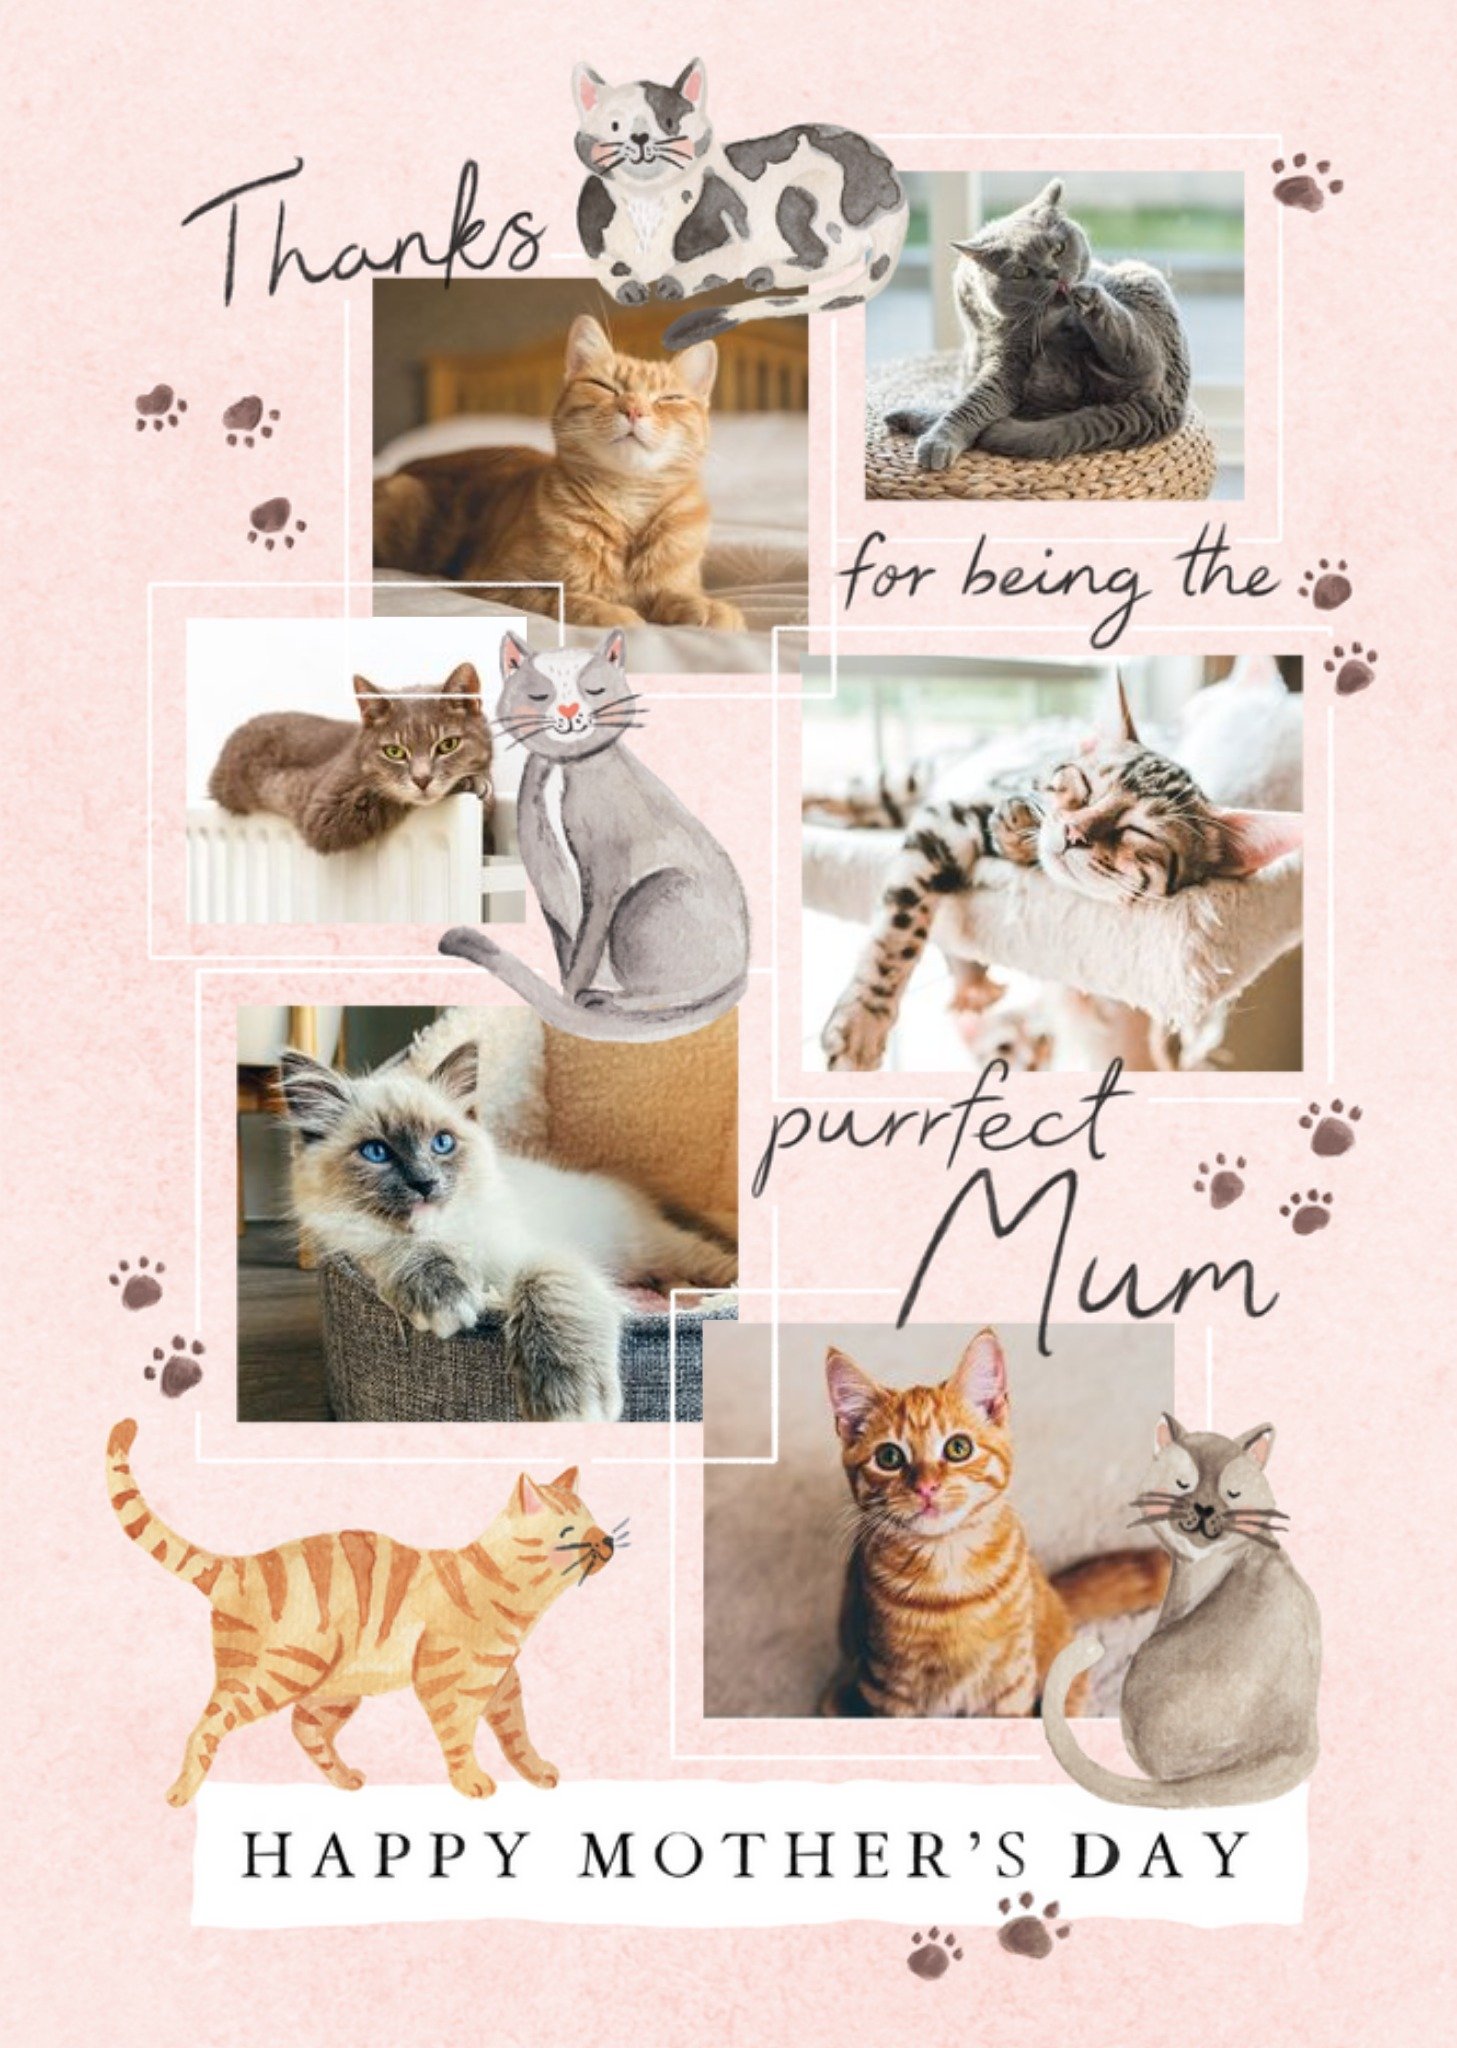 Moonpig Purrfect Mum Illustrated Cats Photo Upload Mother's Day Card Ecard